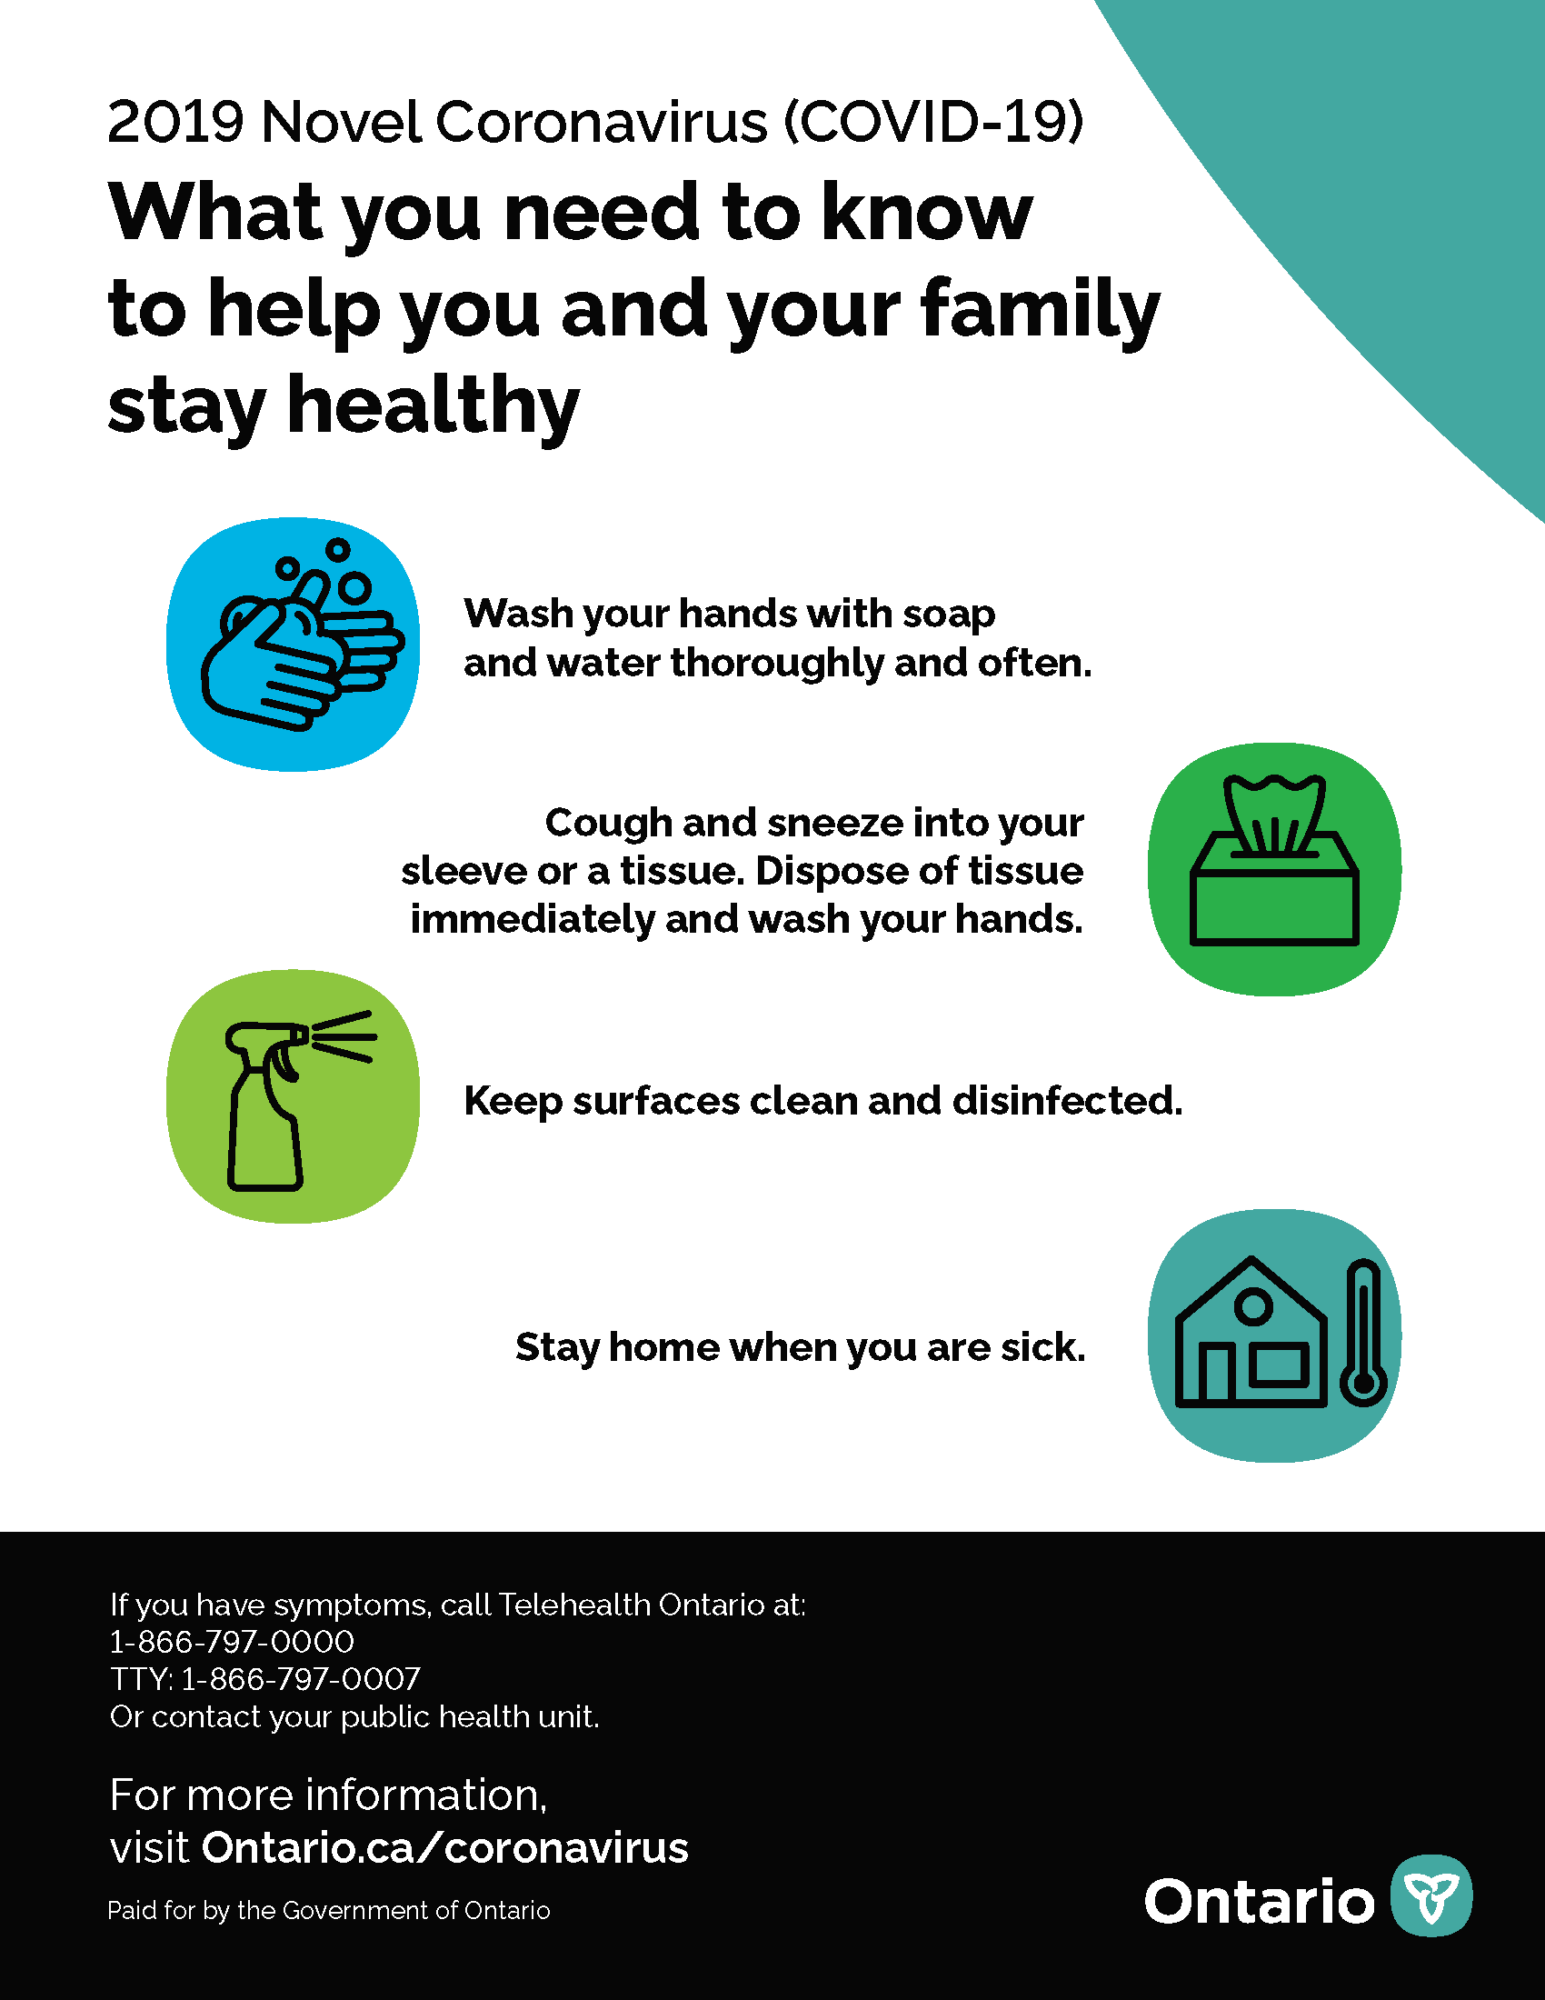 2019 Novel Coronavirus. What you need to know to help you and your family stay healthy.